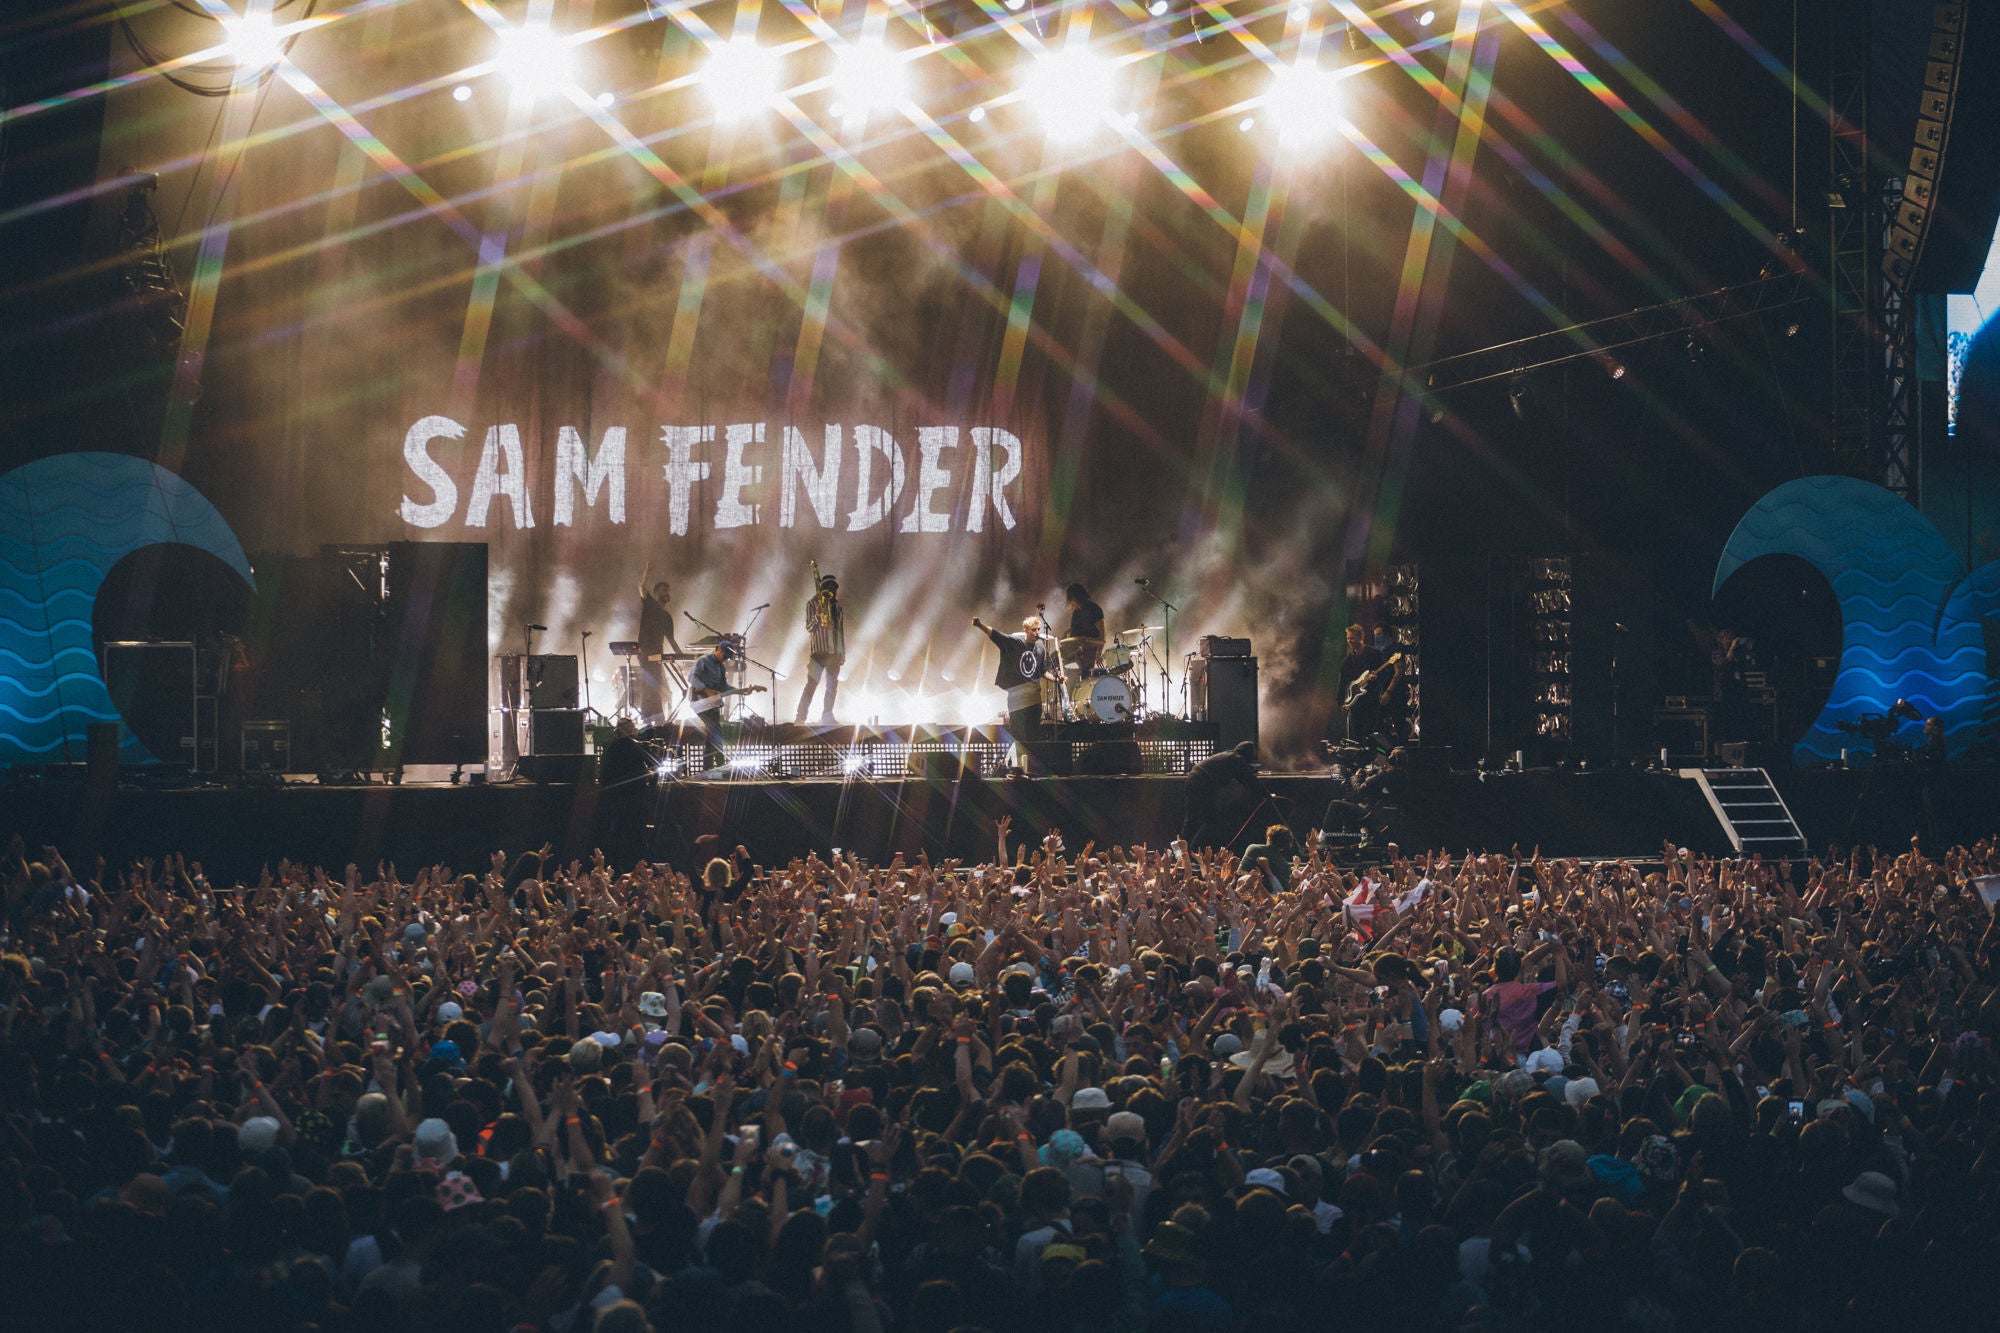 Festival goers watching Sam Fender during the Boardmasters music and surfing festival in Cornwall